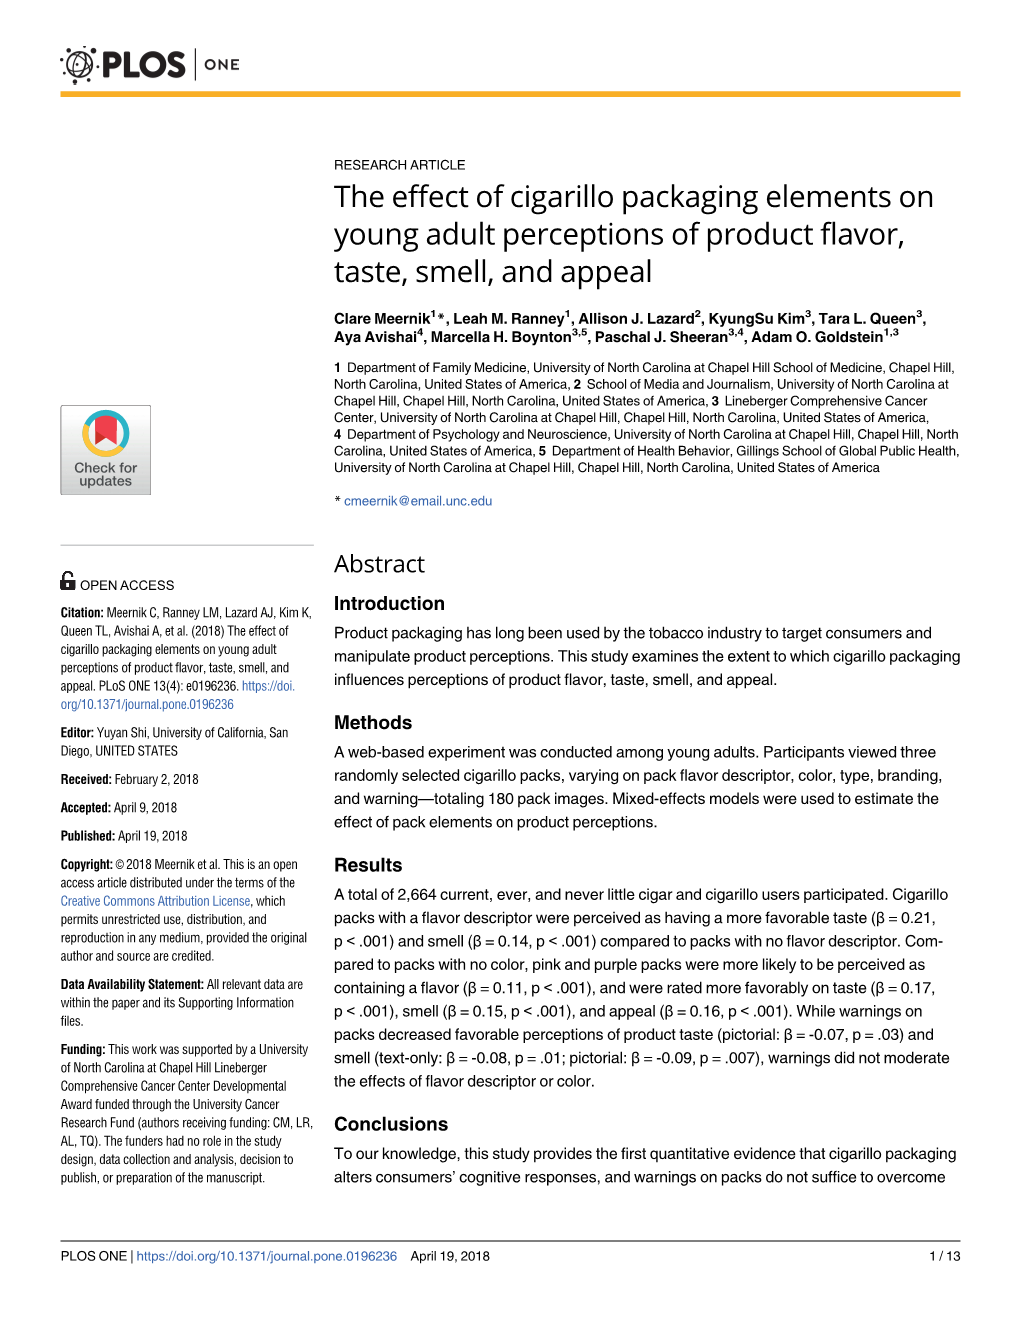 The Effect of Cigarillo Packaging Elements on Young Adult Perceptions of Product Flavor, Taste, Smell, and Appeal